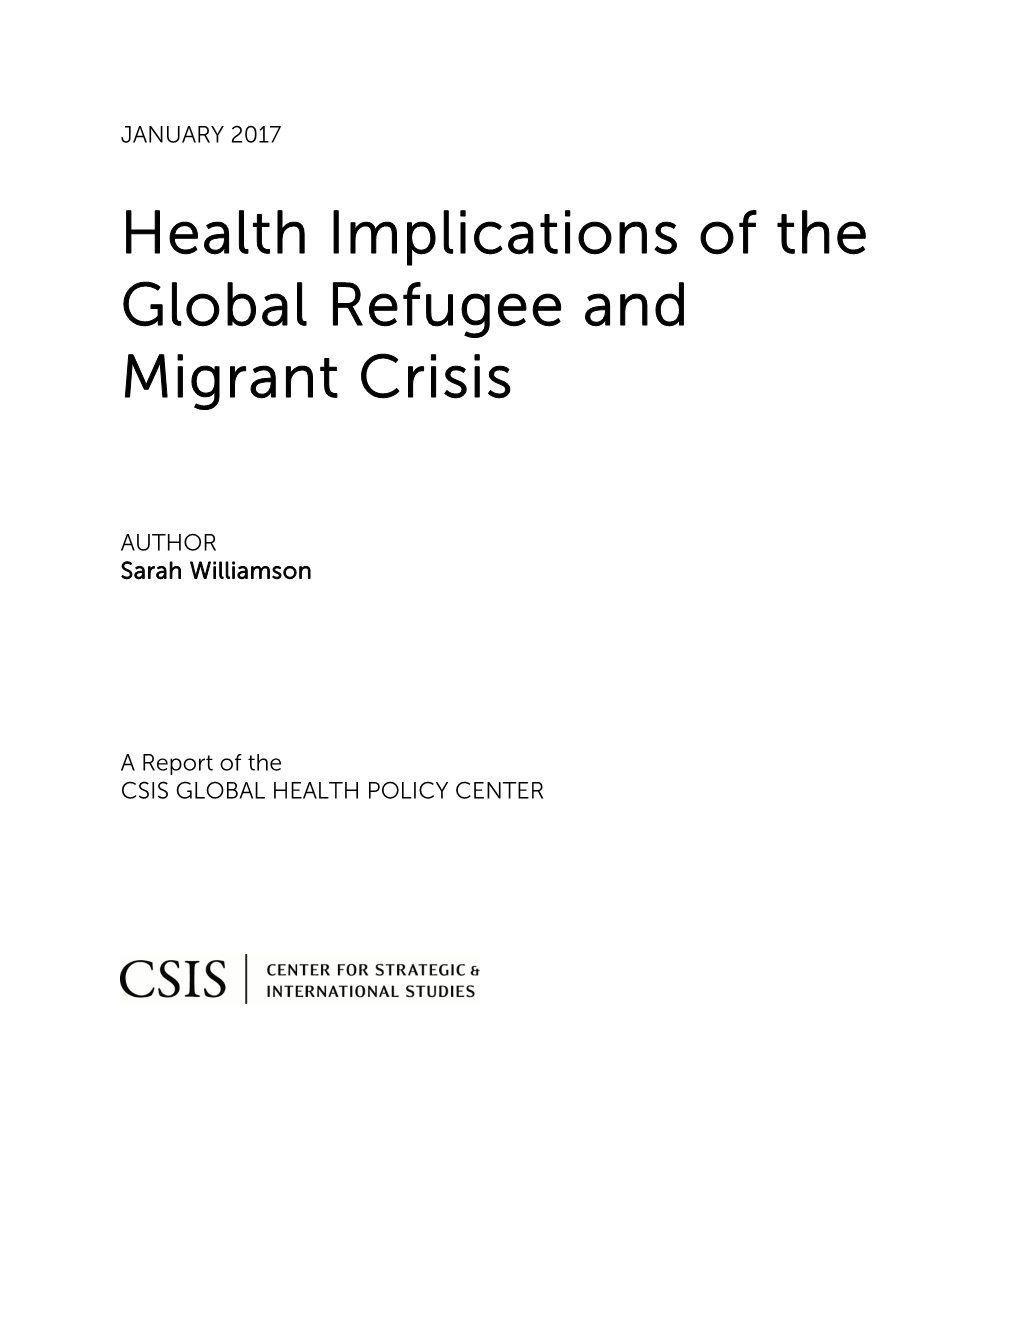 Health Implications of the Global Refugee and Migrant Crisis